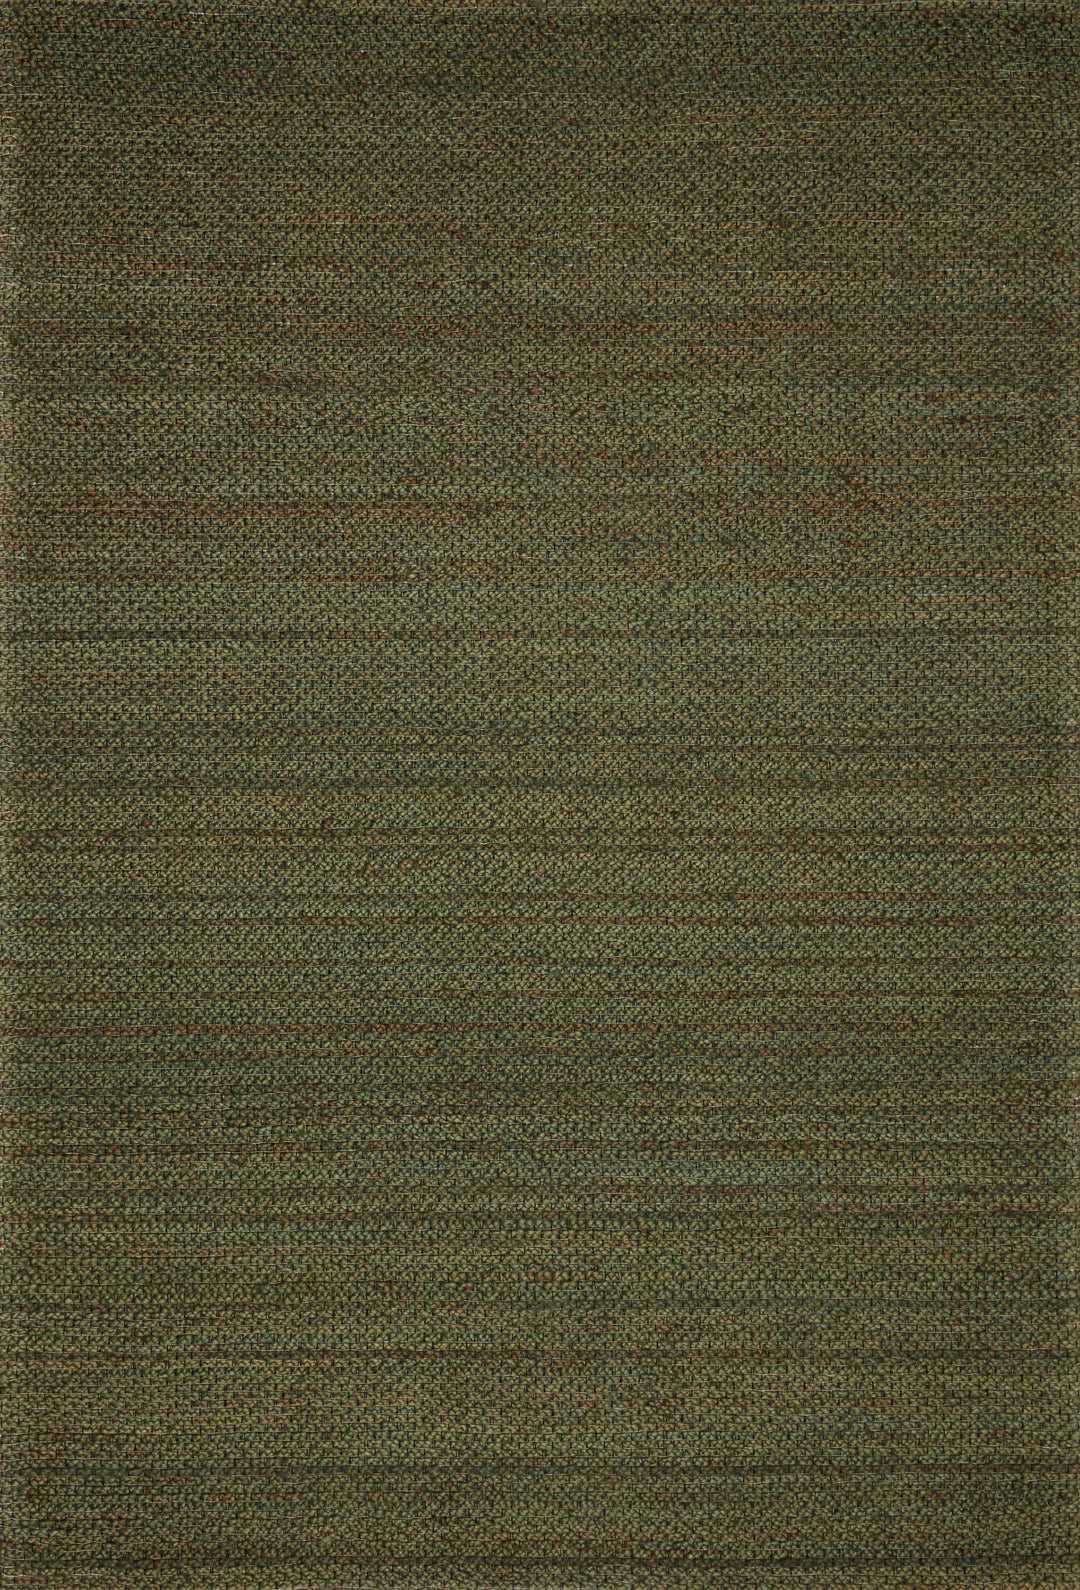 Loloi Lily Green Rug LIL-01